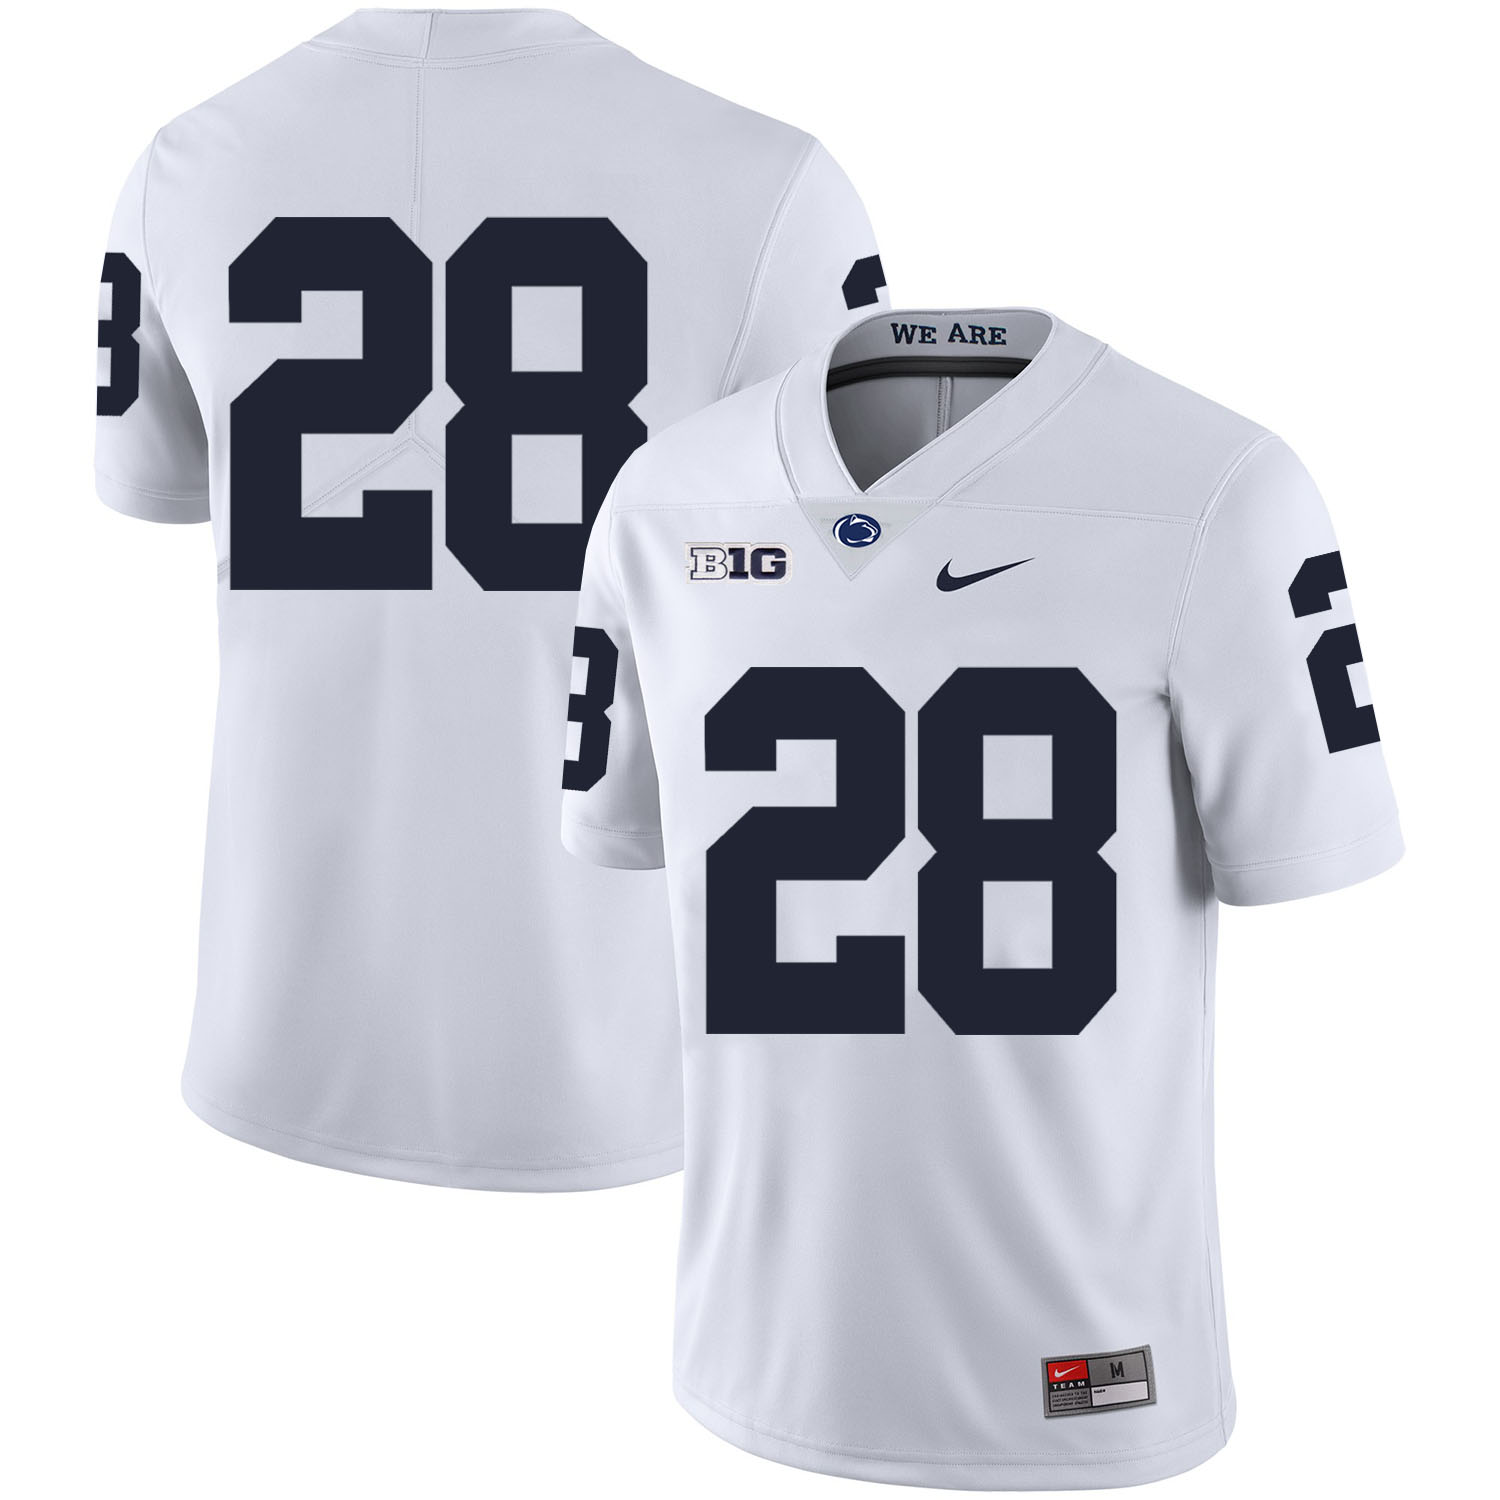 Penn State Nittany Lions 28 Troy Apke White Nike College Football Jersey